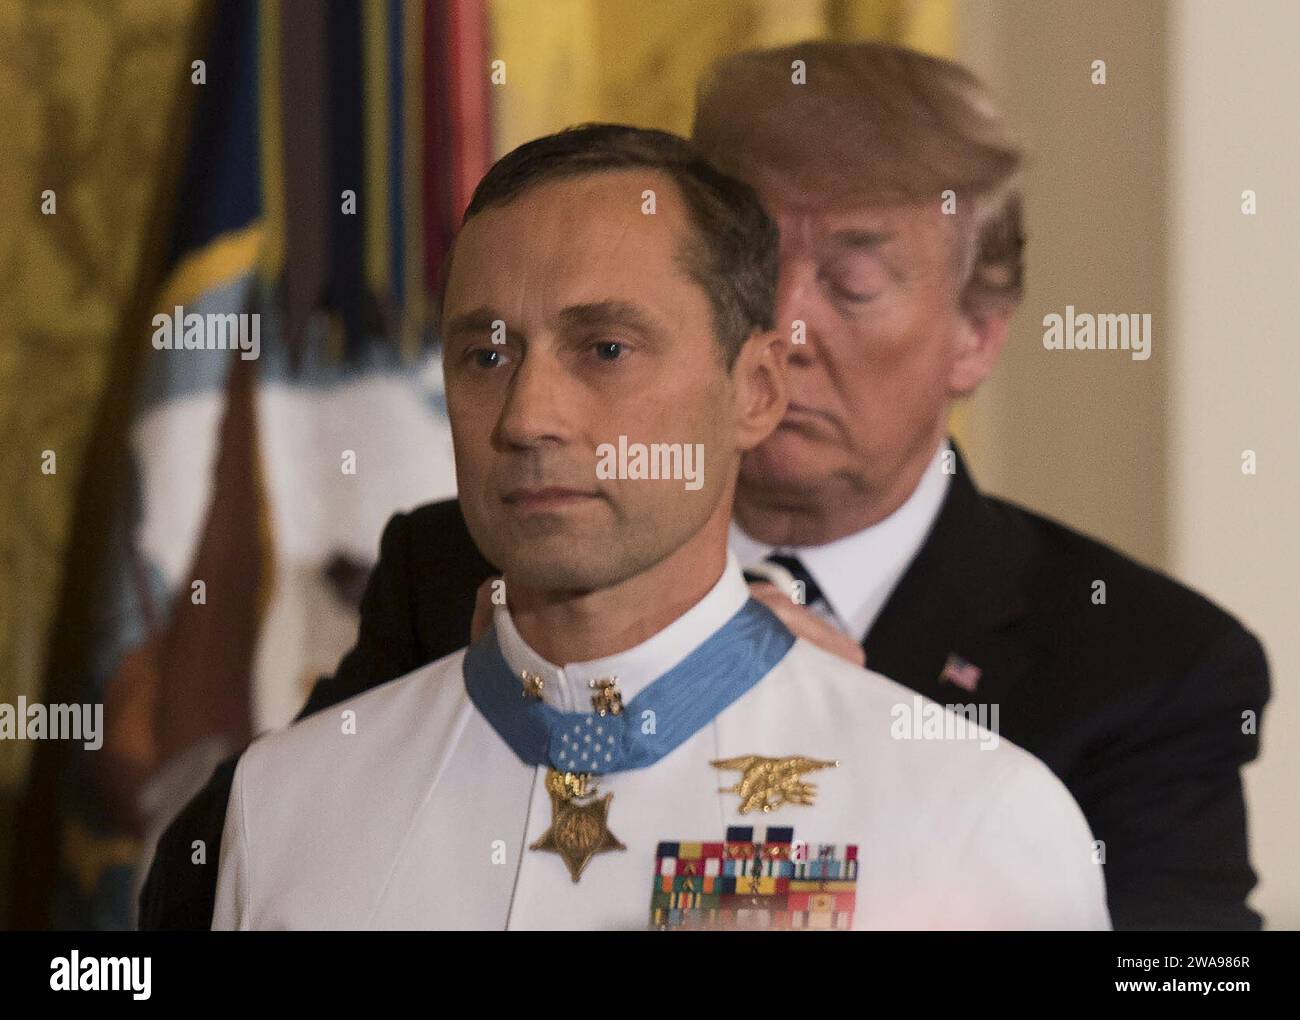 US military forces. 180524BB269-003 WASHINGTON (May 24, 2018) President Donald J. Trump presents the Medal of Honor to retired Master Chief Special Warfare Operator (SEAL) Britt Slabinski during a ceremony at the White House in Washington, D.C. Slabinski received the Medal of Honor for his actions during Operation Anaconda in Afghanistan in March 2002. (U.S. Navy photo by Mass Communication Specialist 1st Class Raymond D. Diaz III/Released) Stock Photo